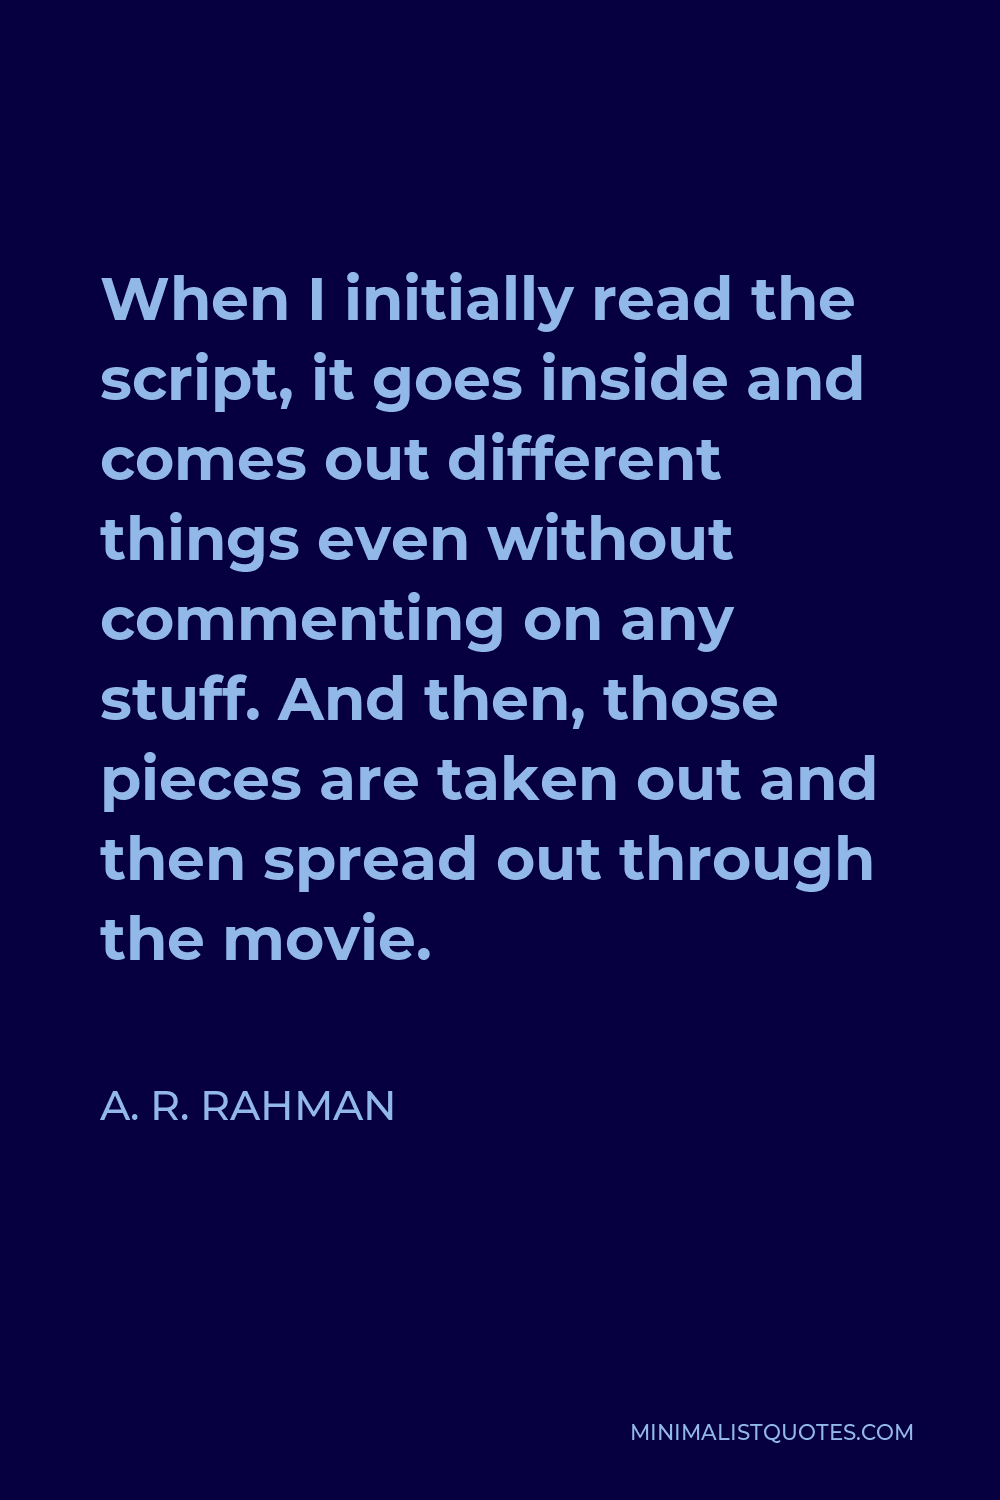 A. R. Rahman Quote - When I initially read the script, it goes inside and comes out different things even without commenting on any stuff. And then, those pieces are taken out and then spread out through the movie.